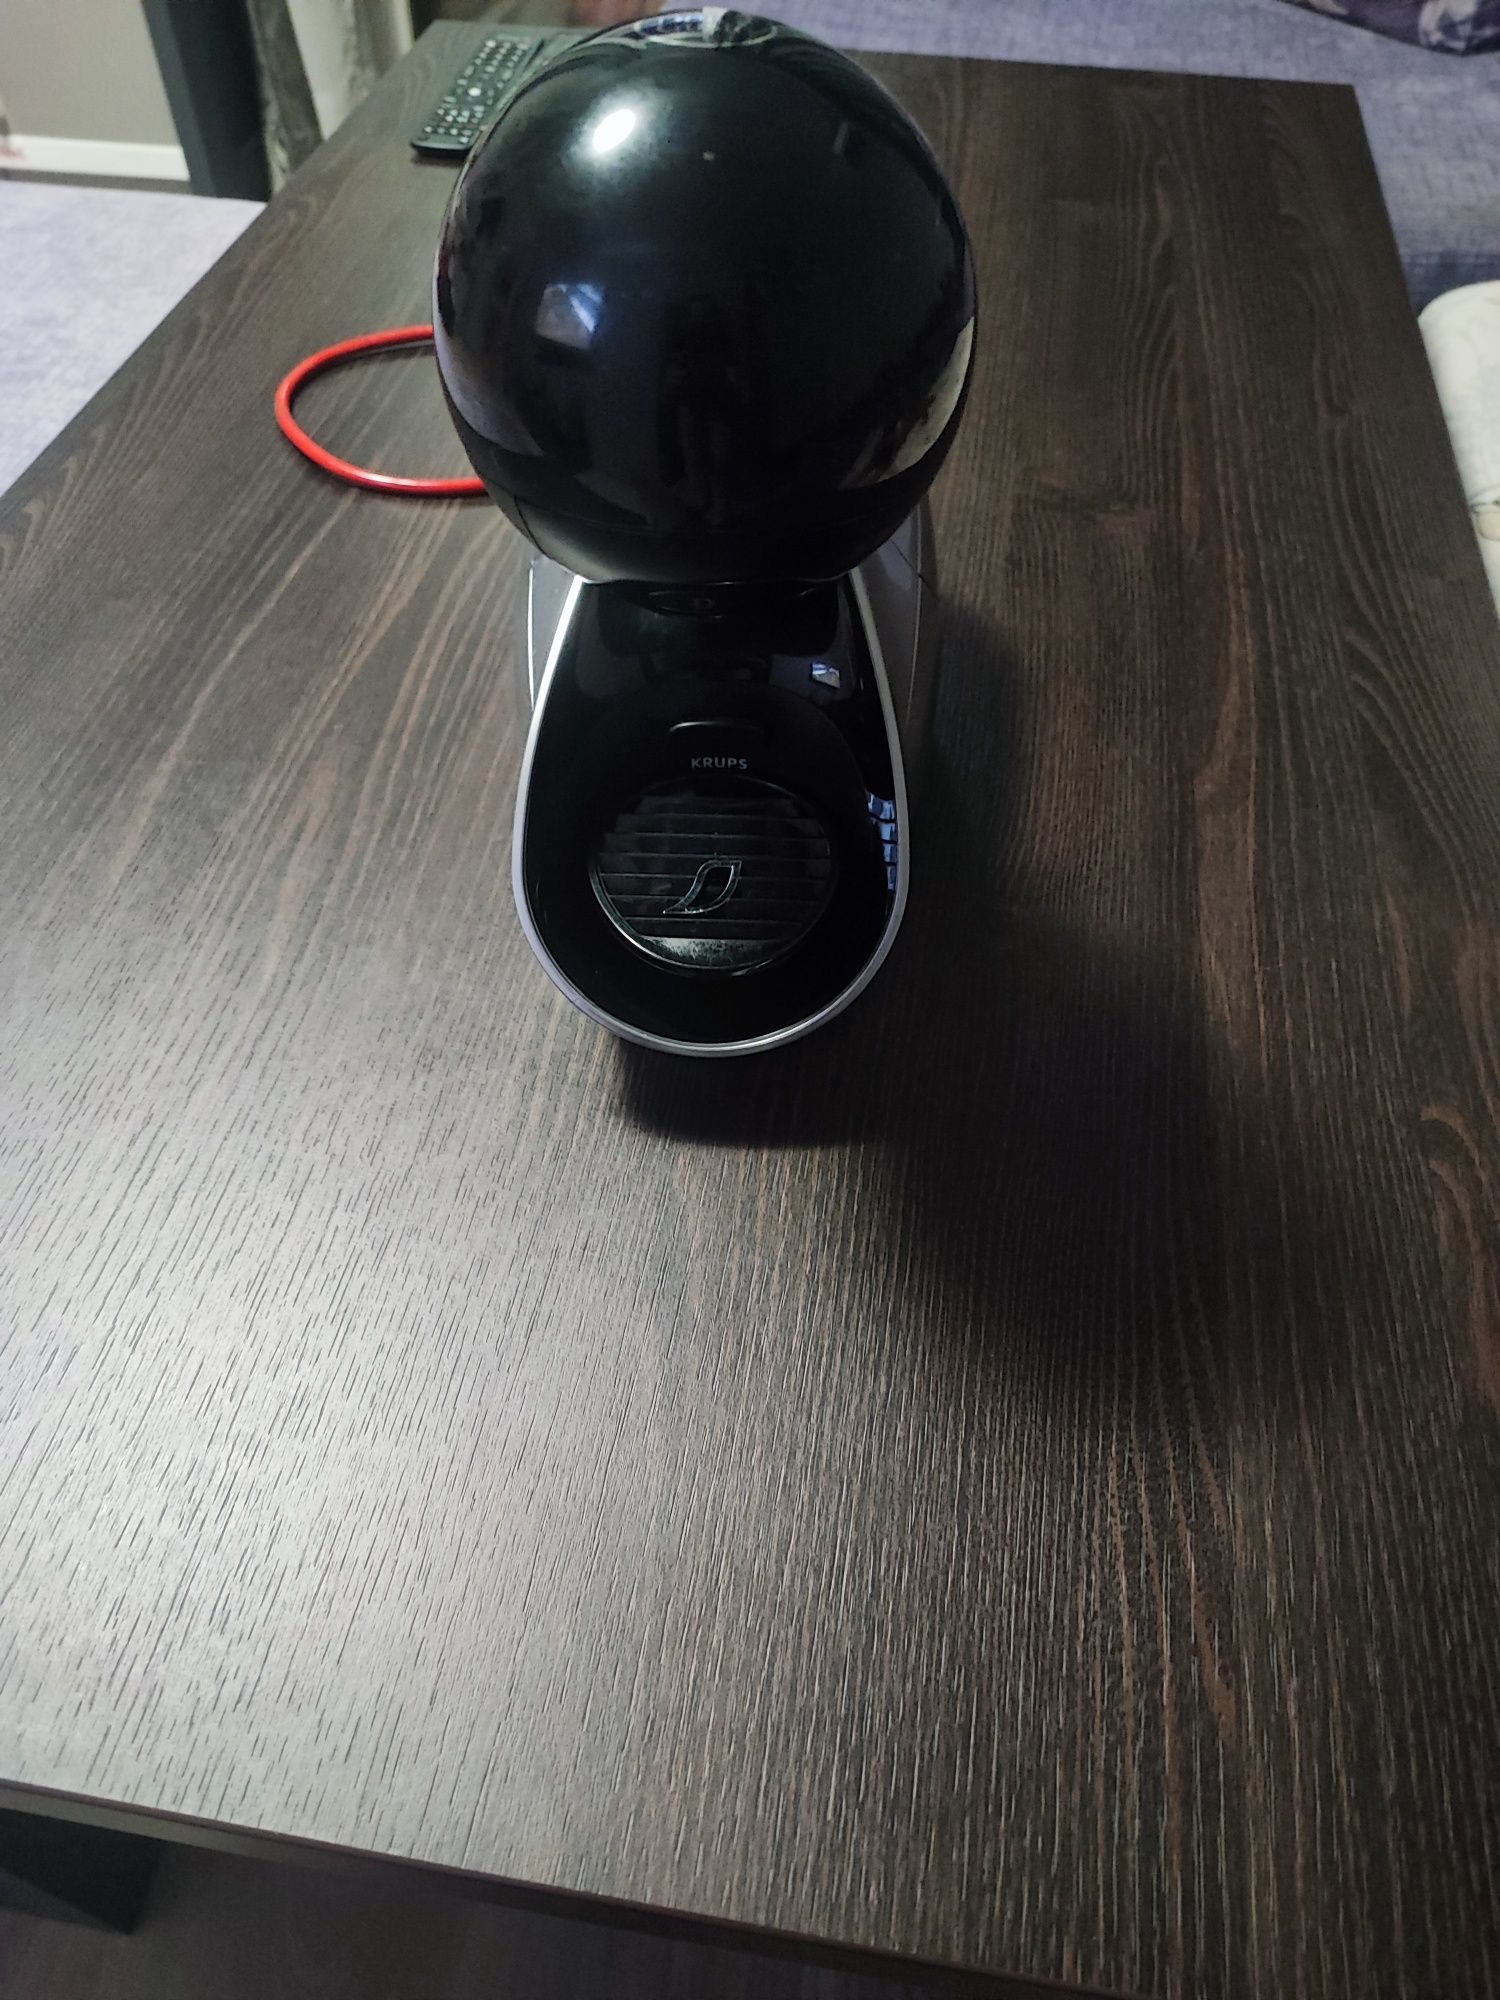 Кафе машина Dolce gusto Movenza